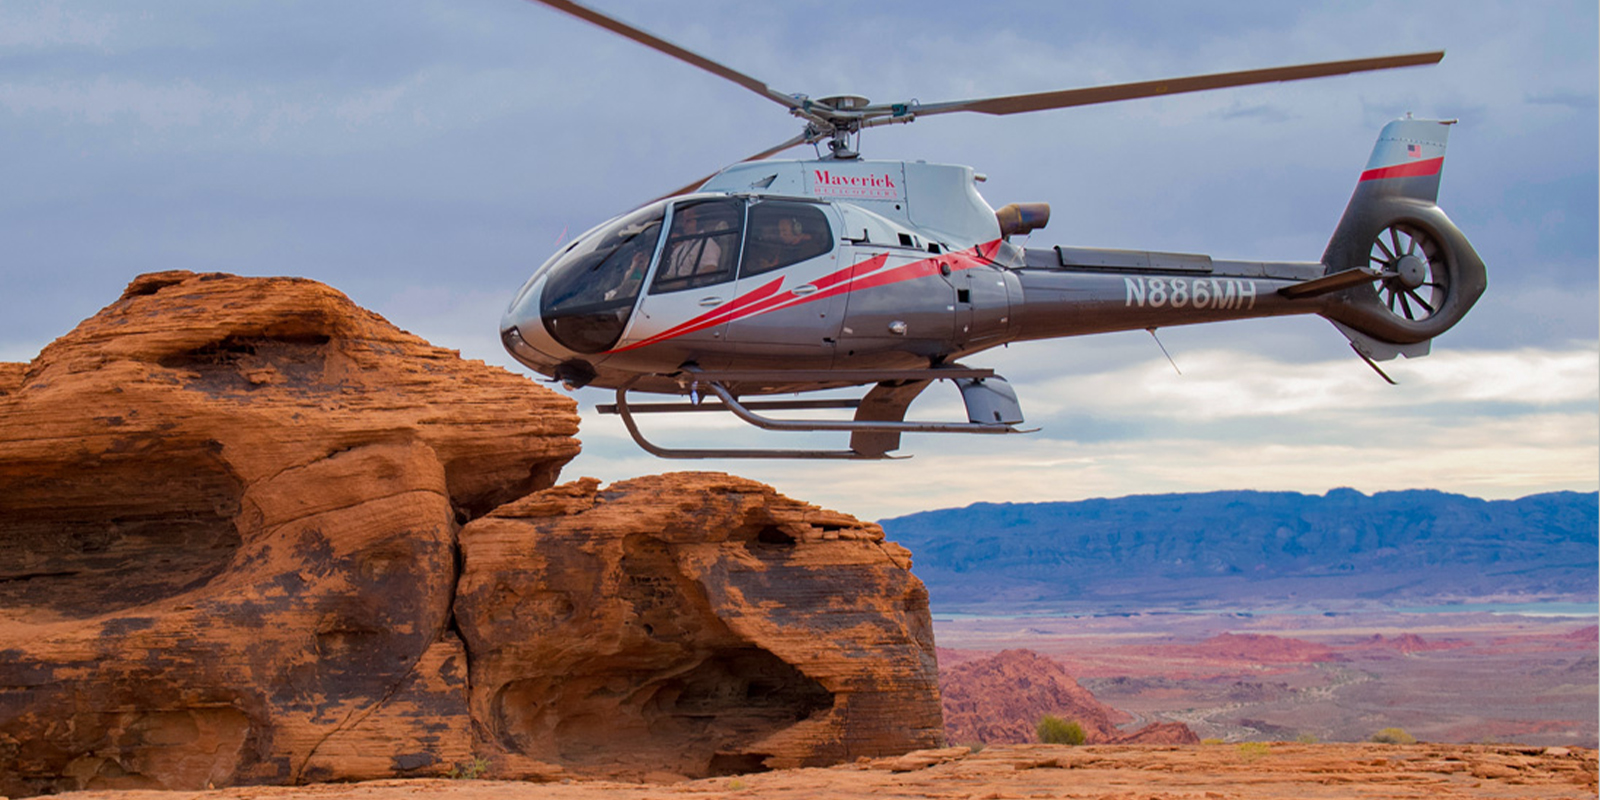 To enter the competition to win a helicopter trip to the grand canyon with Tom.